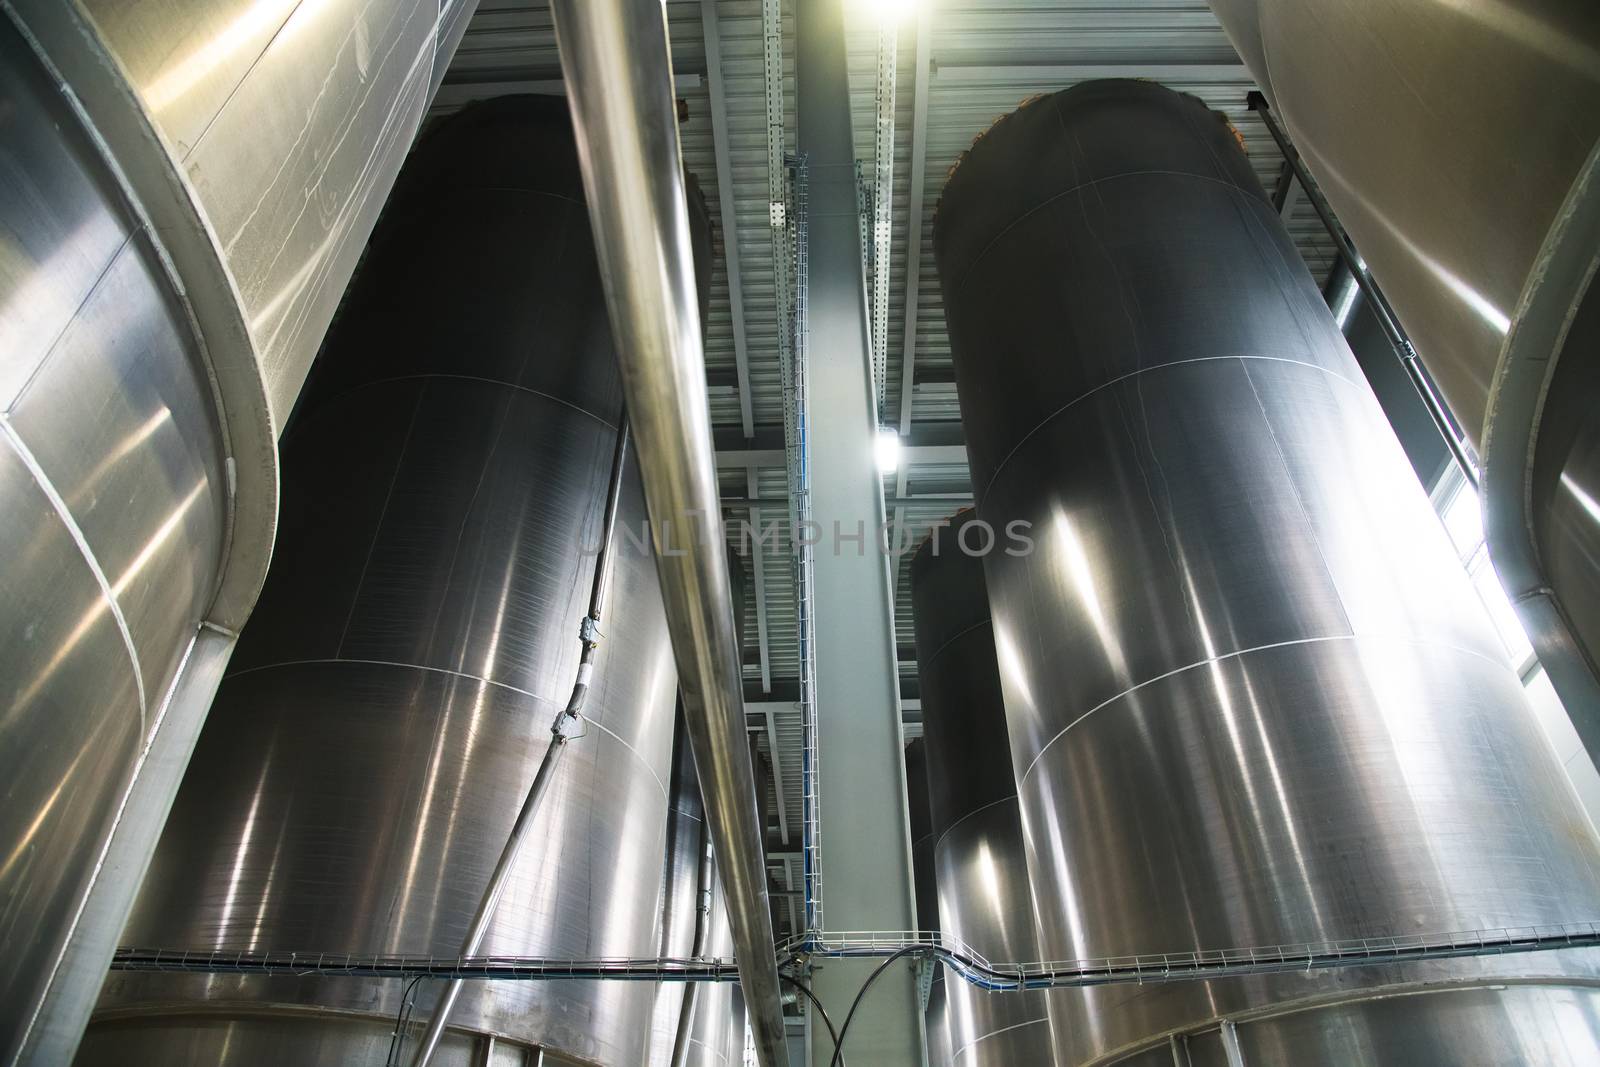 Grain processing facility inside. Industrial factory silos and equipment for food production